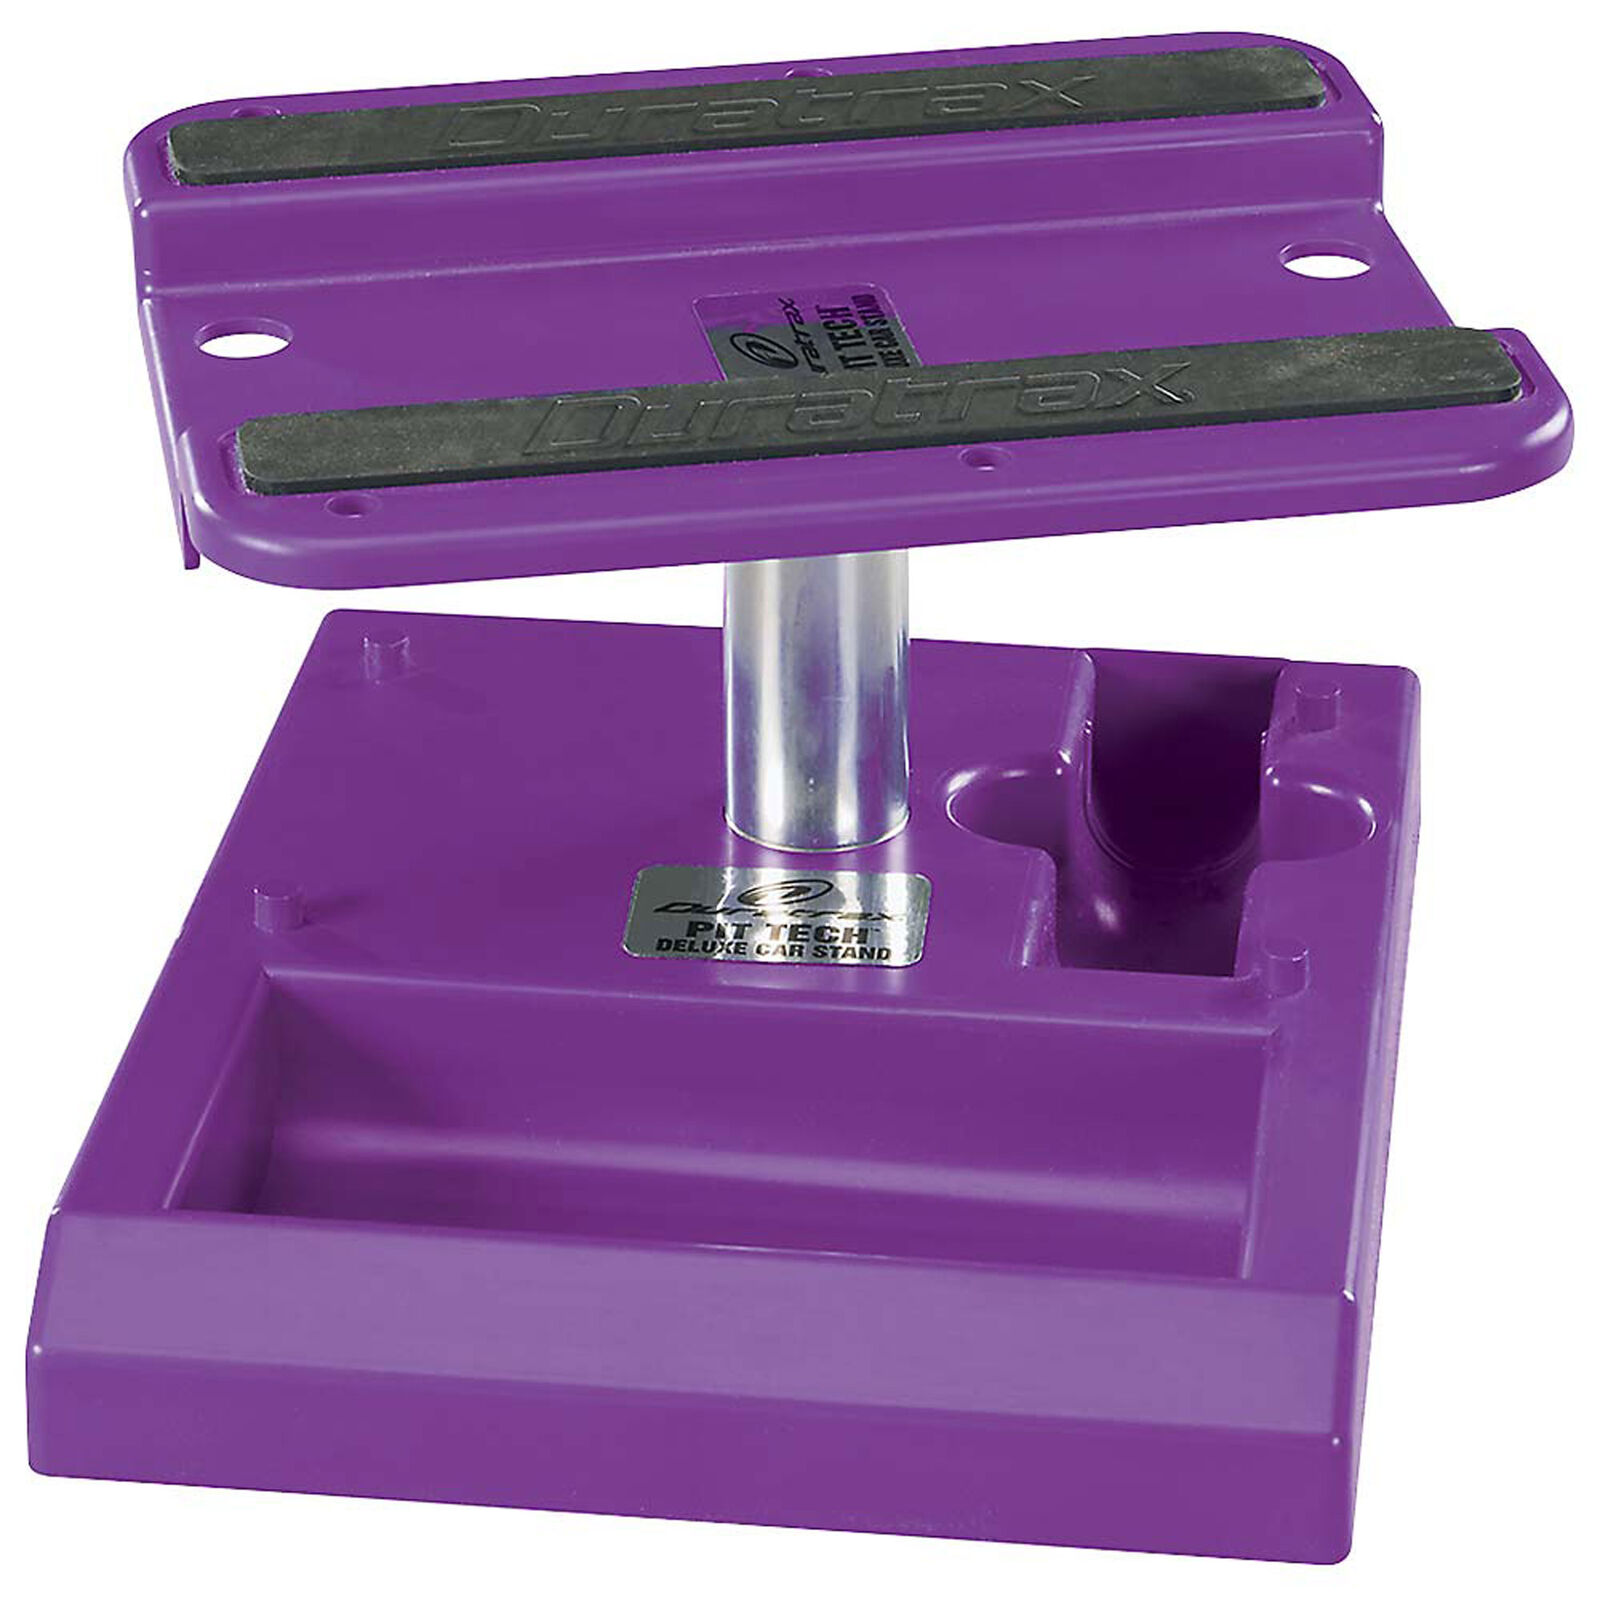 Pit Tech Deluxe Car Stand, Purple